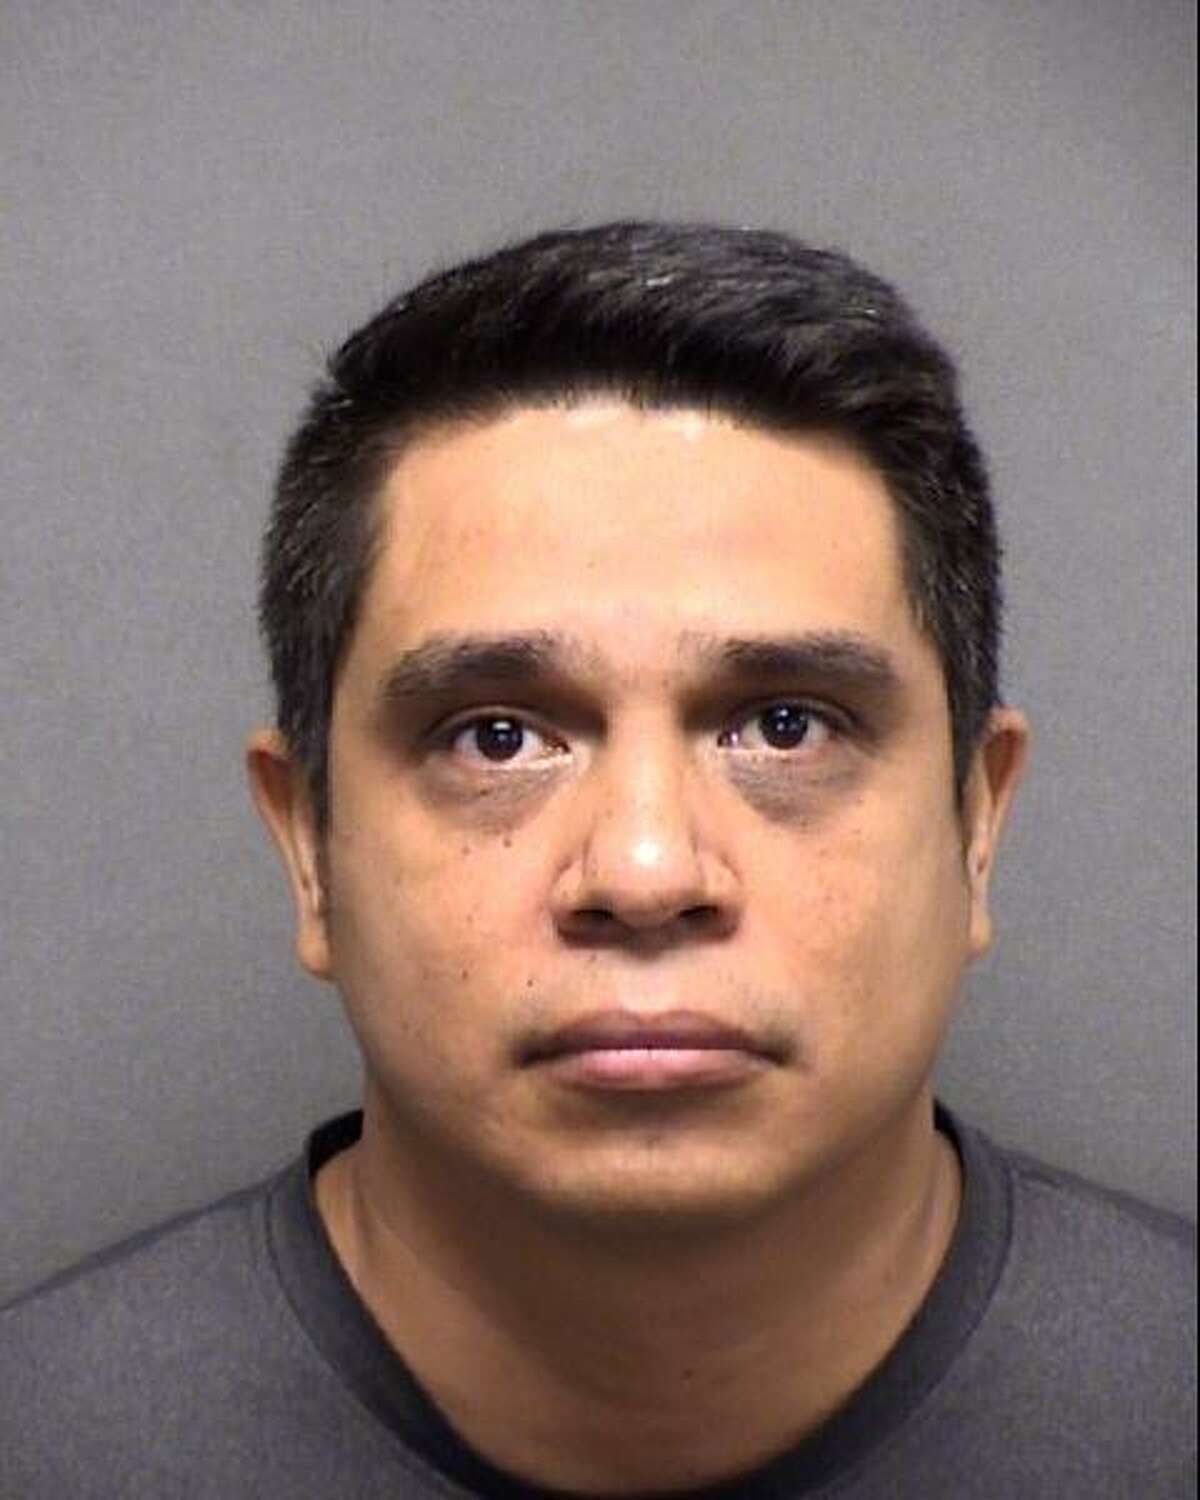 Christopher Mendoza, 37, was arrested Dec. 9 and charged with possession of child pornography and possession with intent to promote child porn, according to Bexar County court records